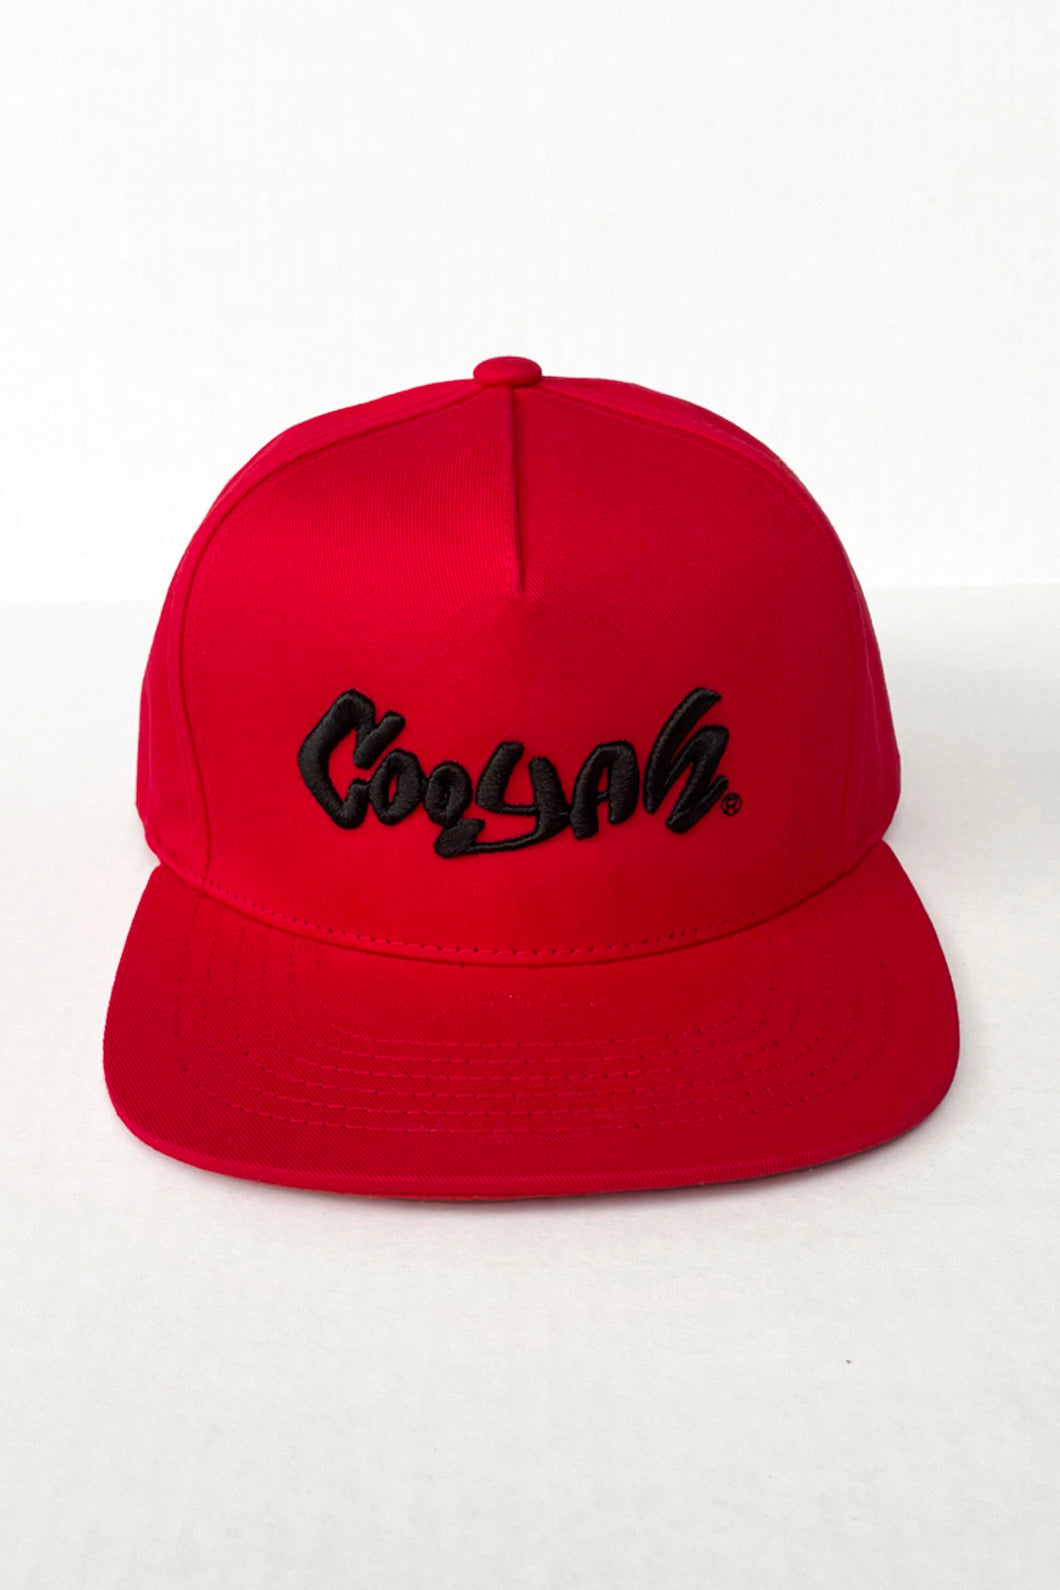 Cooyah Brand Jamaica 5 Panel Embroidered Snapback Hats in red.  Jamaican streetwear, dancehall clothing.